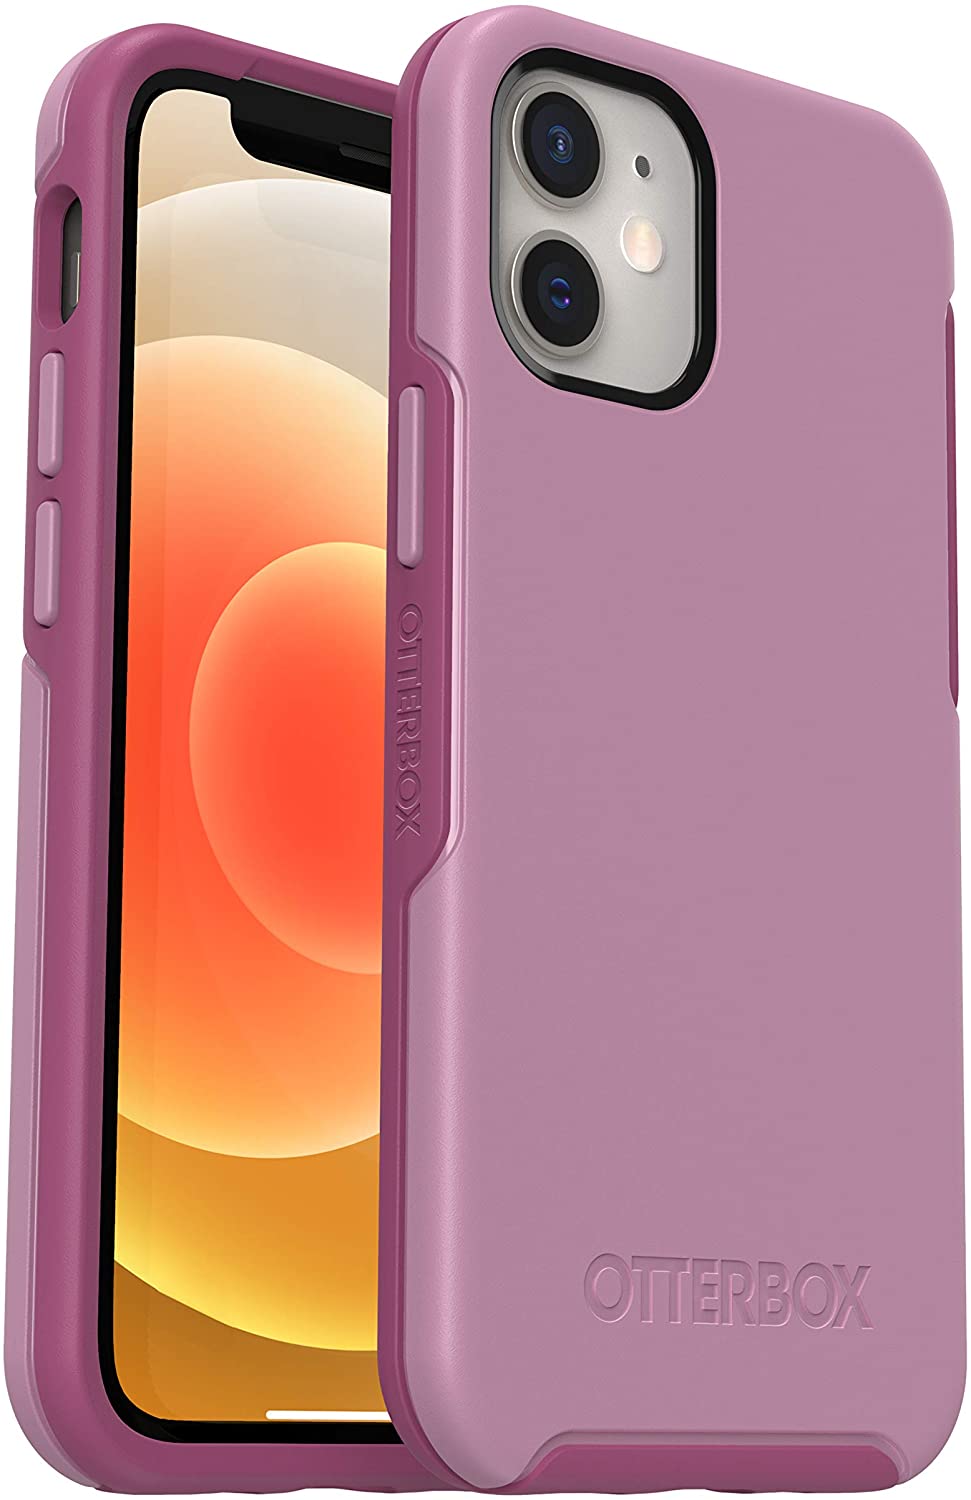 OtterBox SYMMETRY SERIES Case for Apple iPhone 12 Mini - Cake Pop (Certified Refurbished)